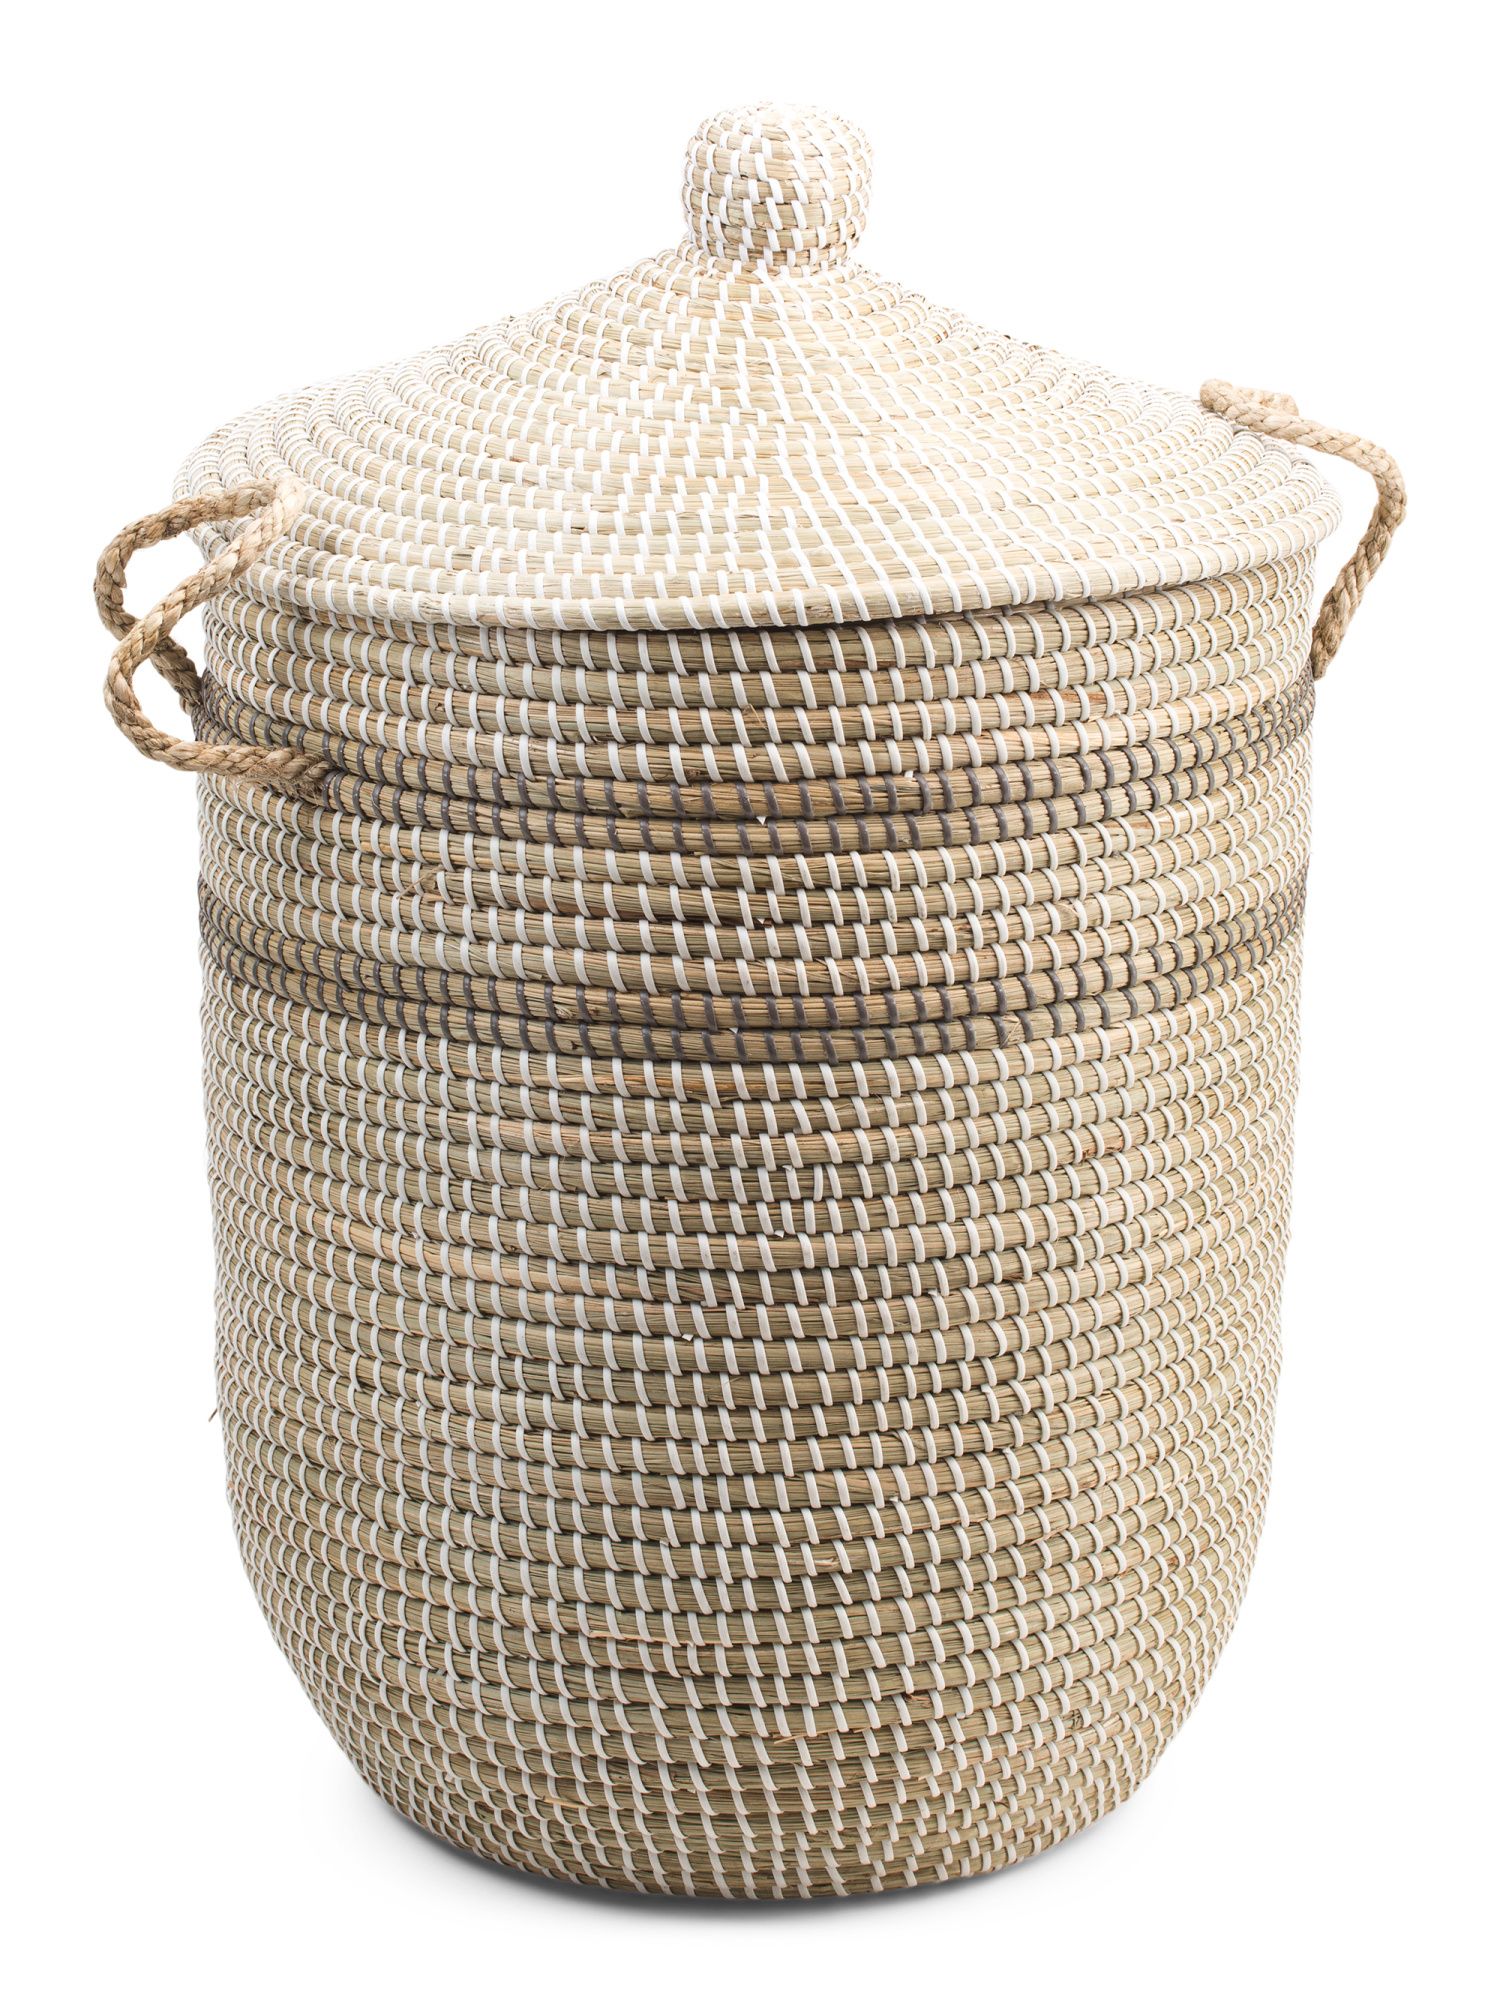 Large Seagrass Storage Basket With Handles | TJ Maxx